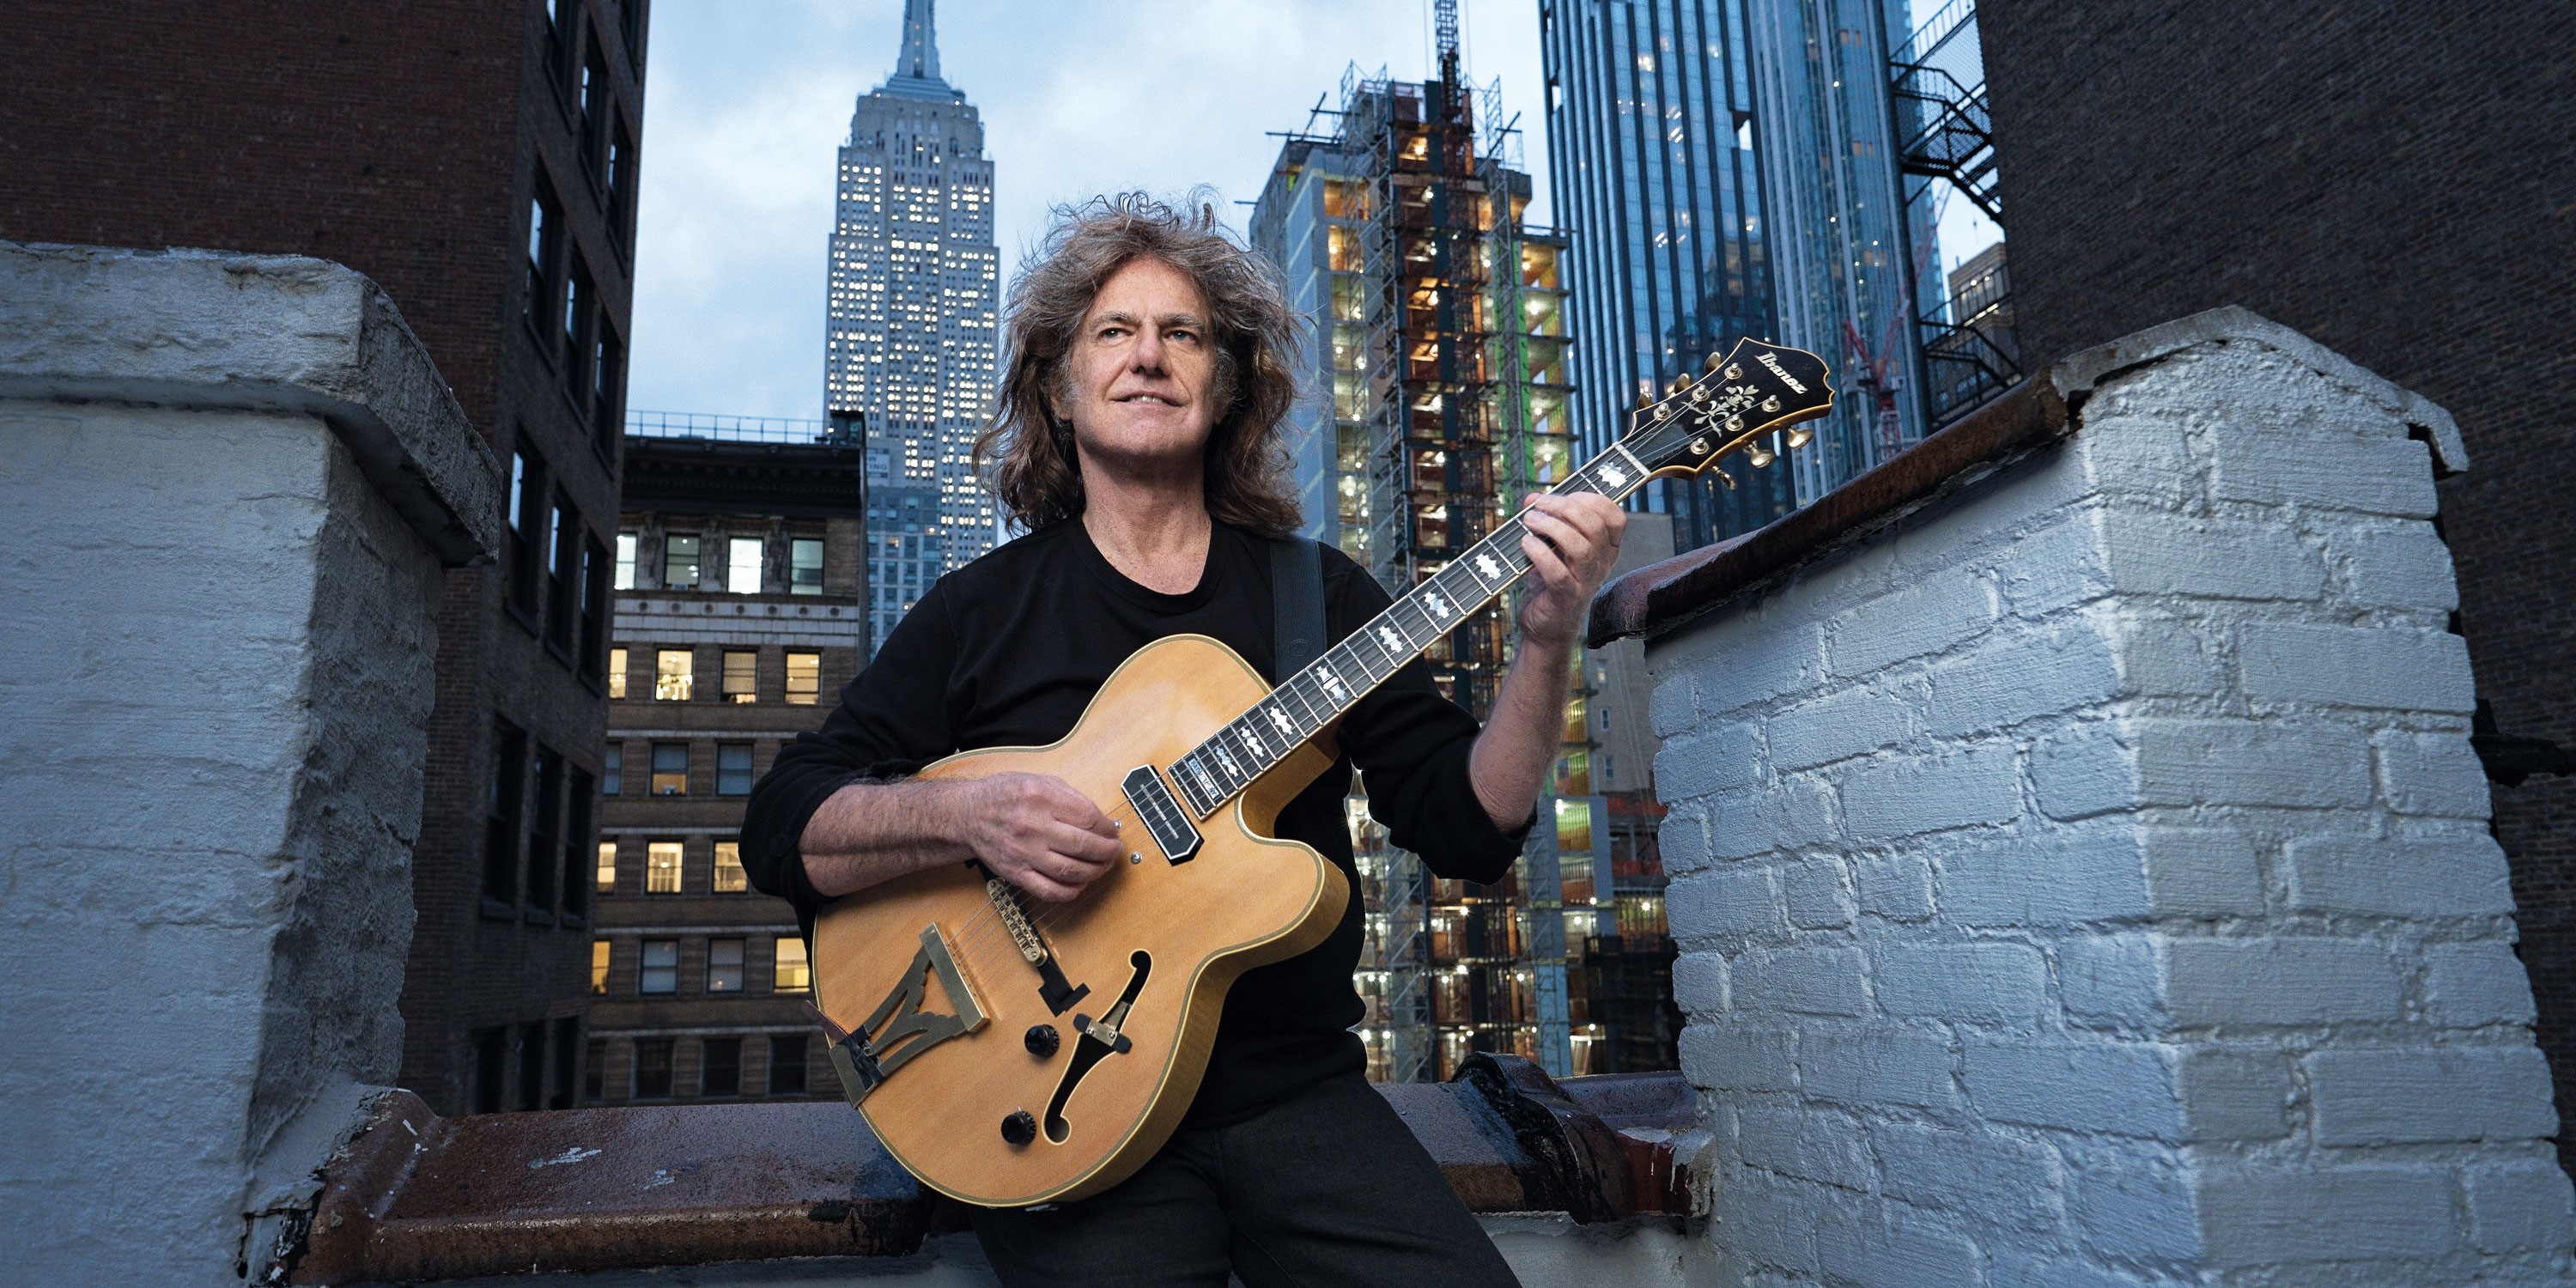 It's way more fun for me now, because I play way better now than I used to'  Pat Metheny interview Jazzwise